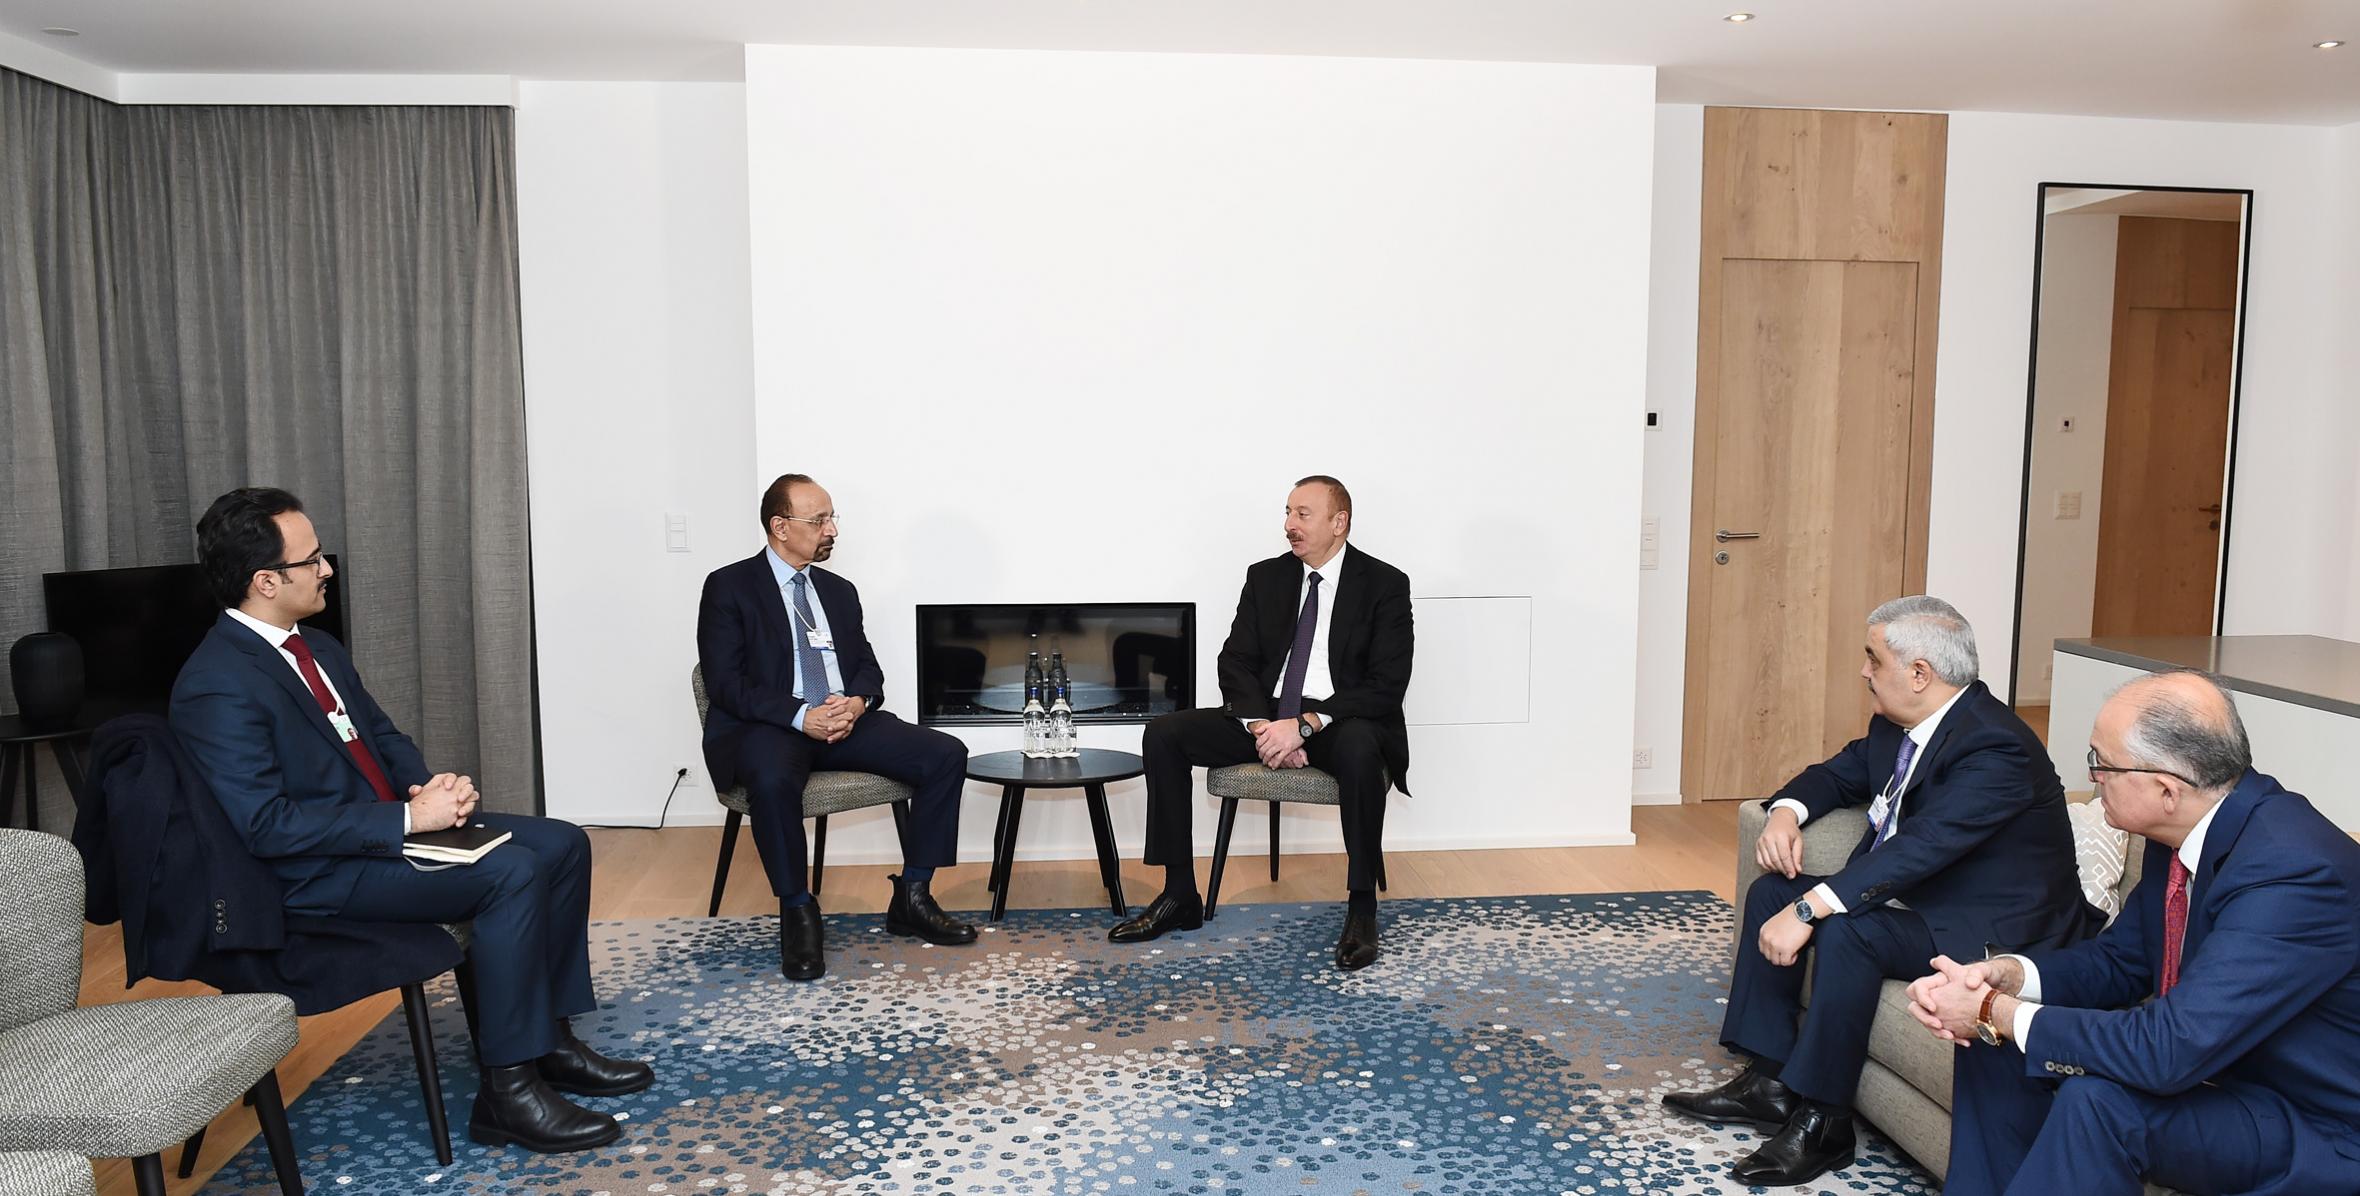 Ilham Aliyev met with Saudi Arabian minister of energy, industry and mineral resources